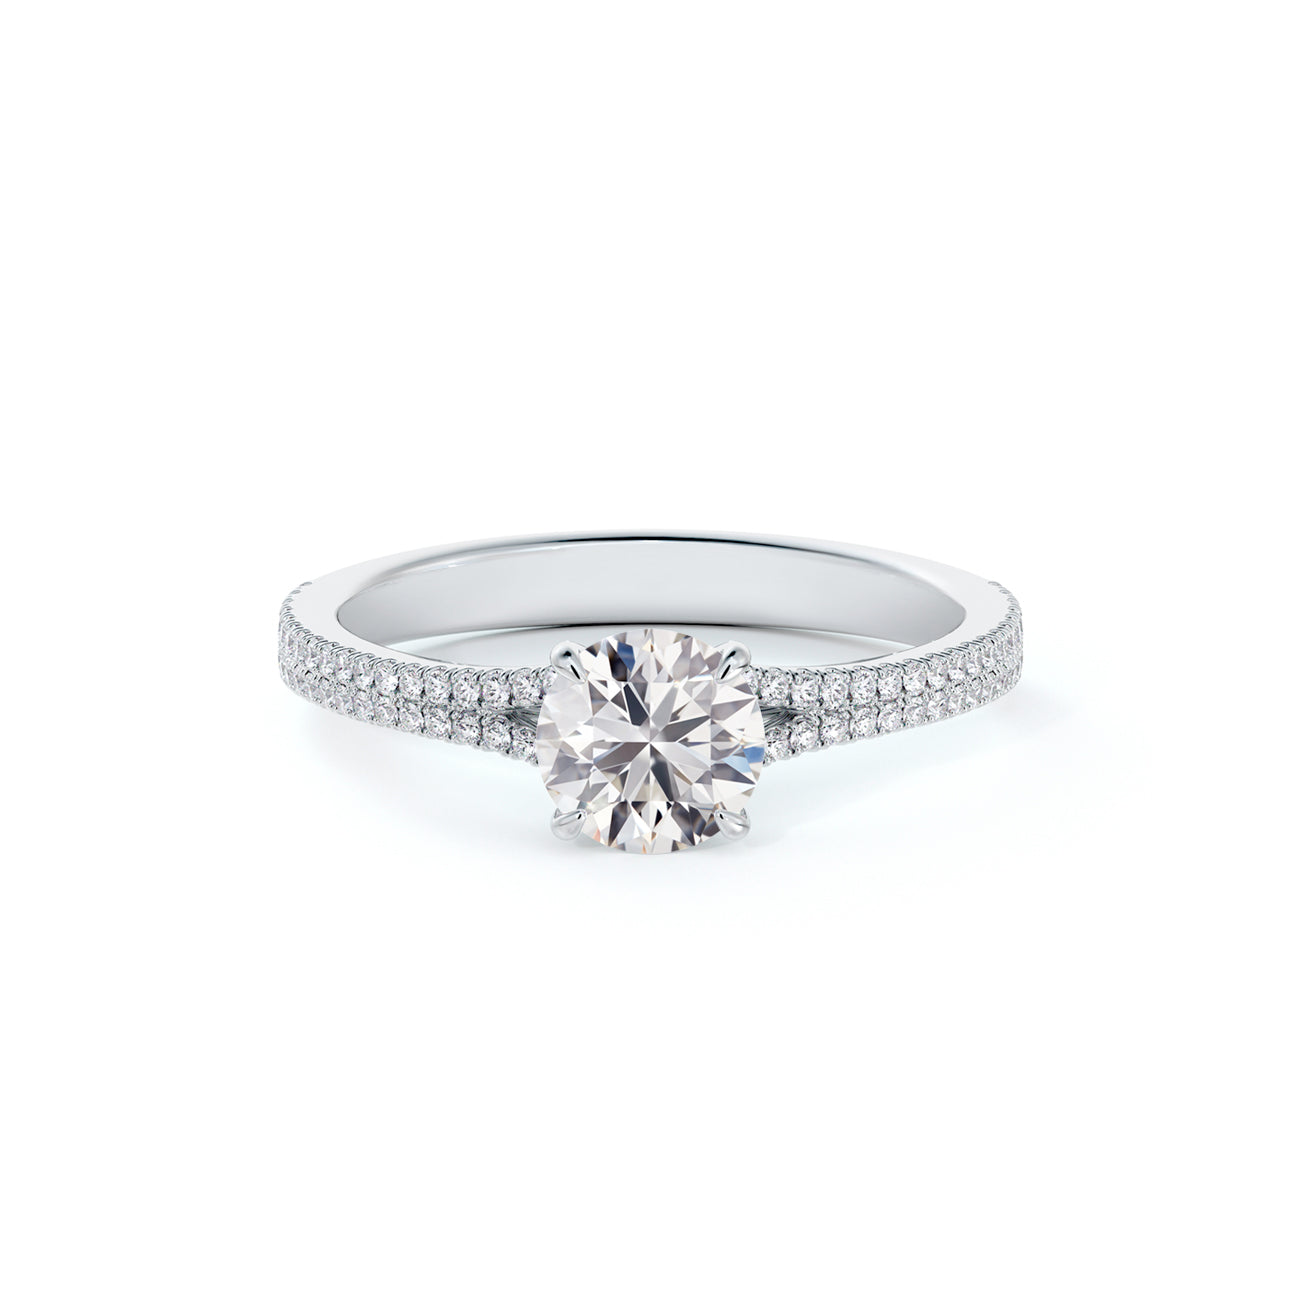 De Beers Forevermark Solitaire 2 Row Pave Diamond Engagement Ring